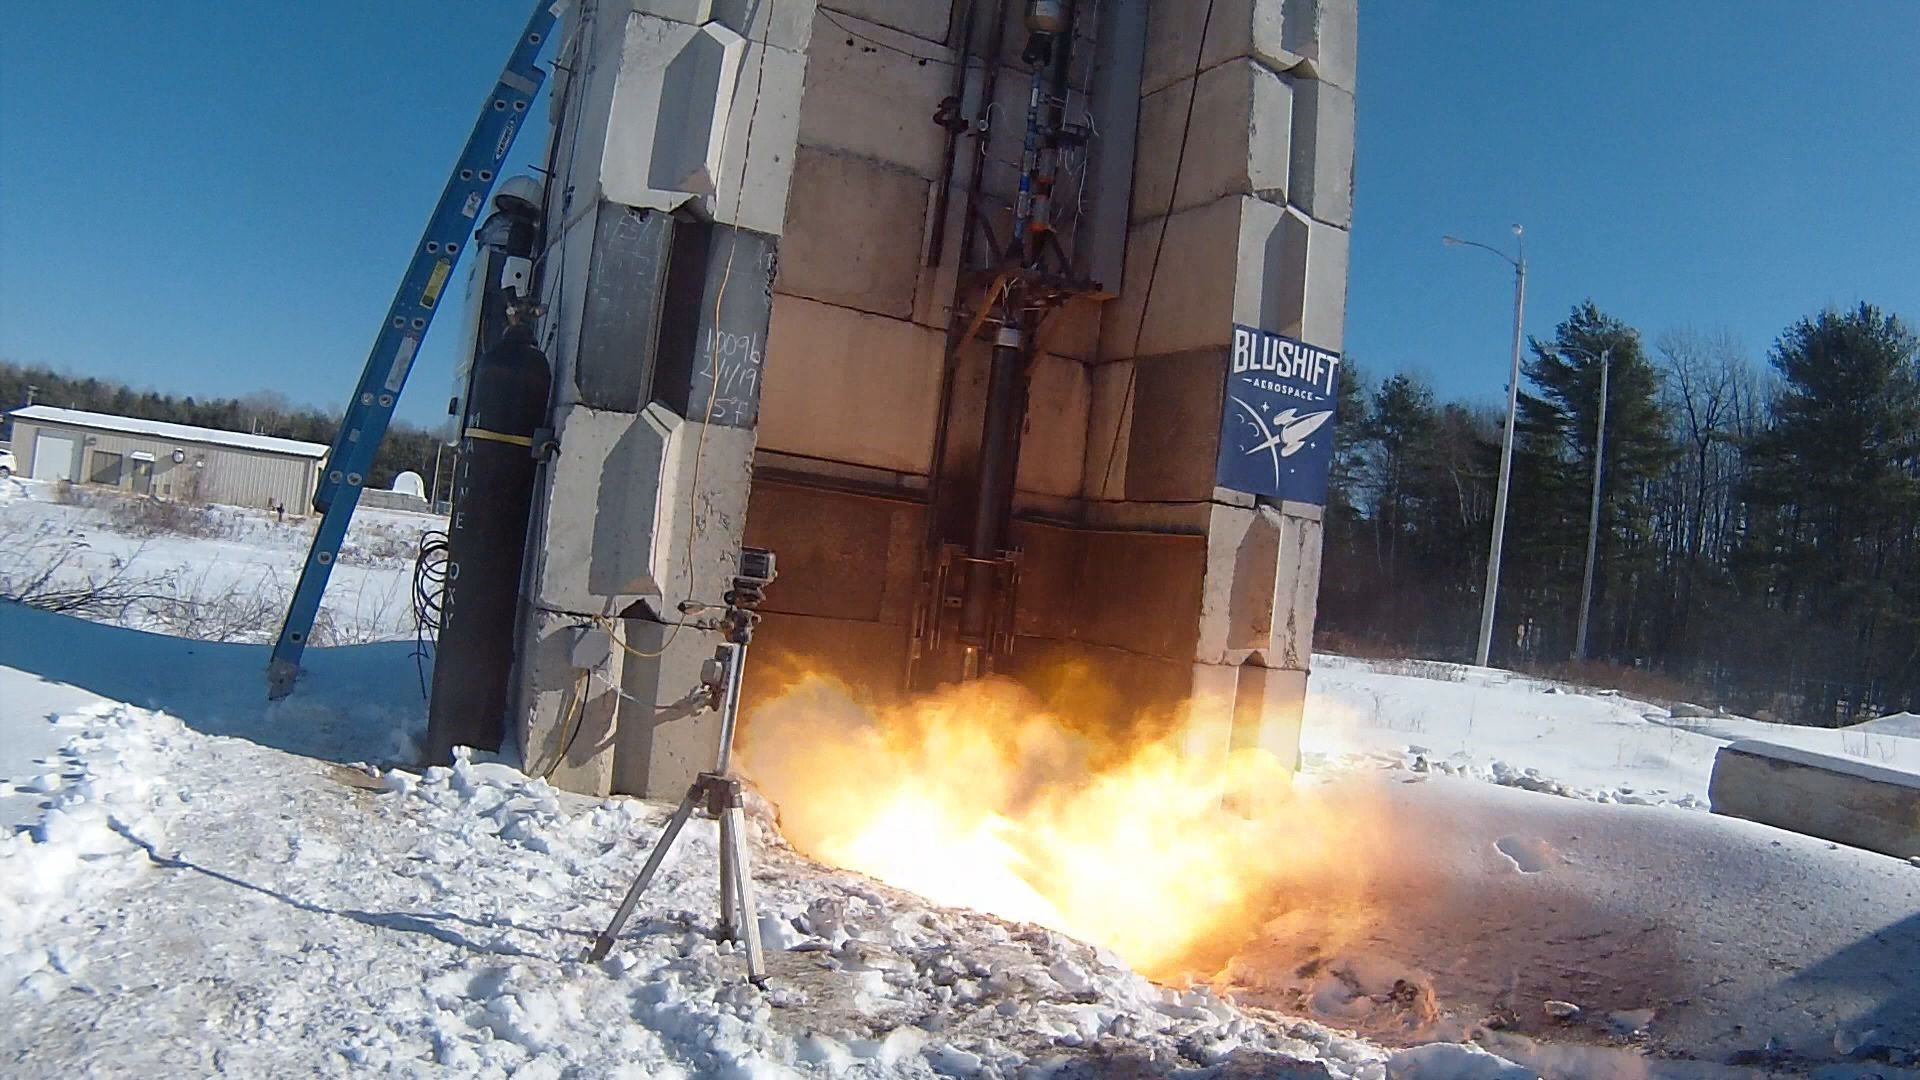 Blushift is testing a type of environmentally friendly rocket fuel.